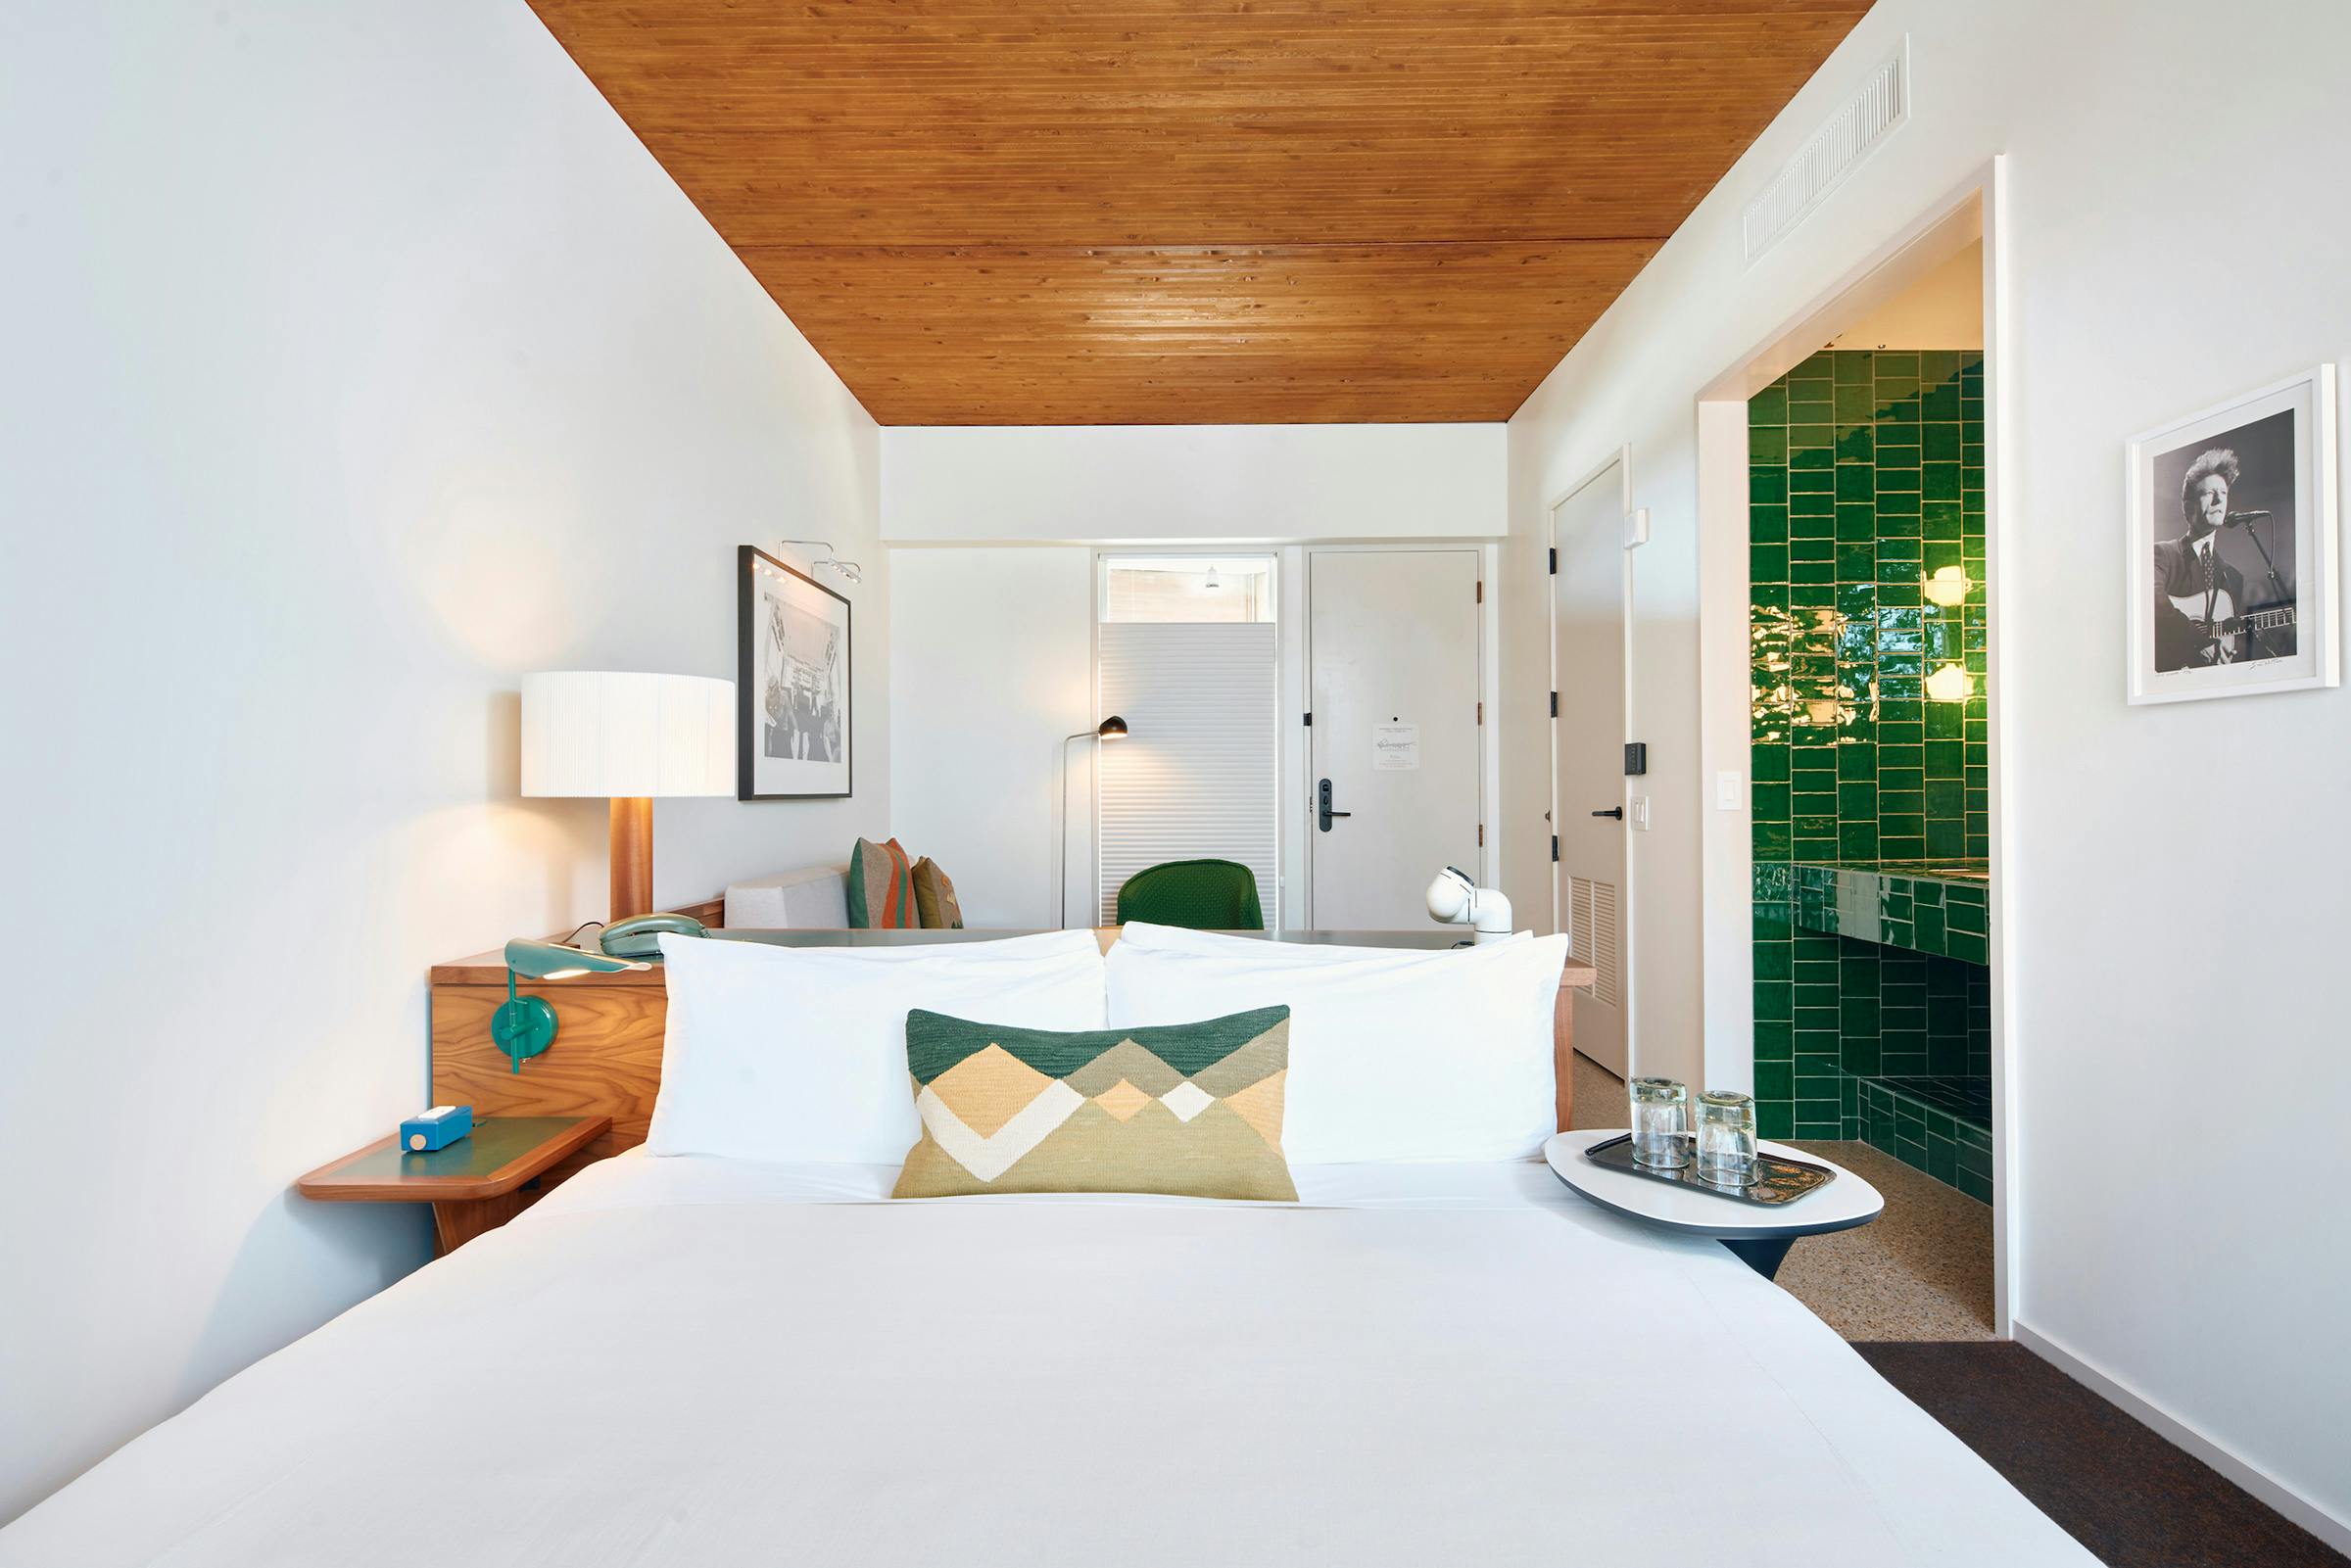 One of Hotel Magdalena's guest rooms, showing a crisply made bed and a deep green tiled counter. 